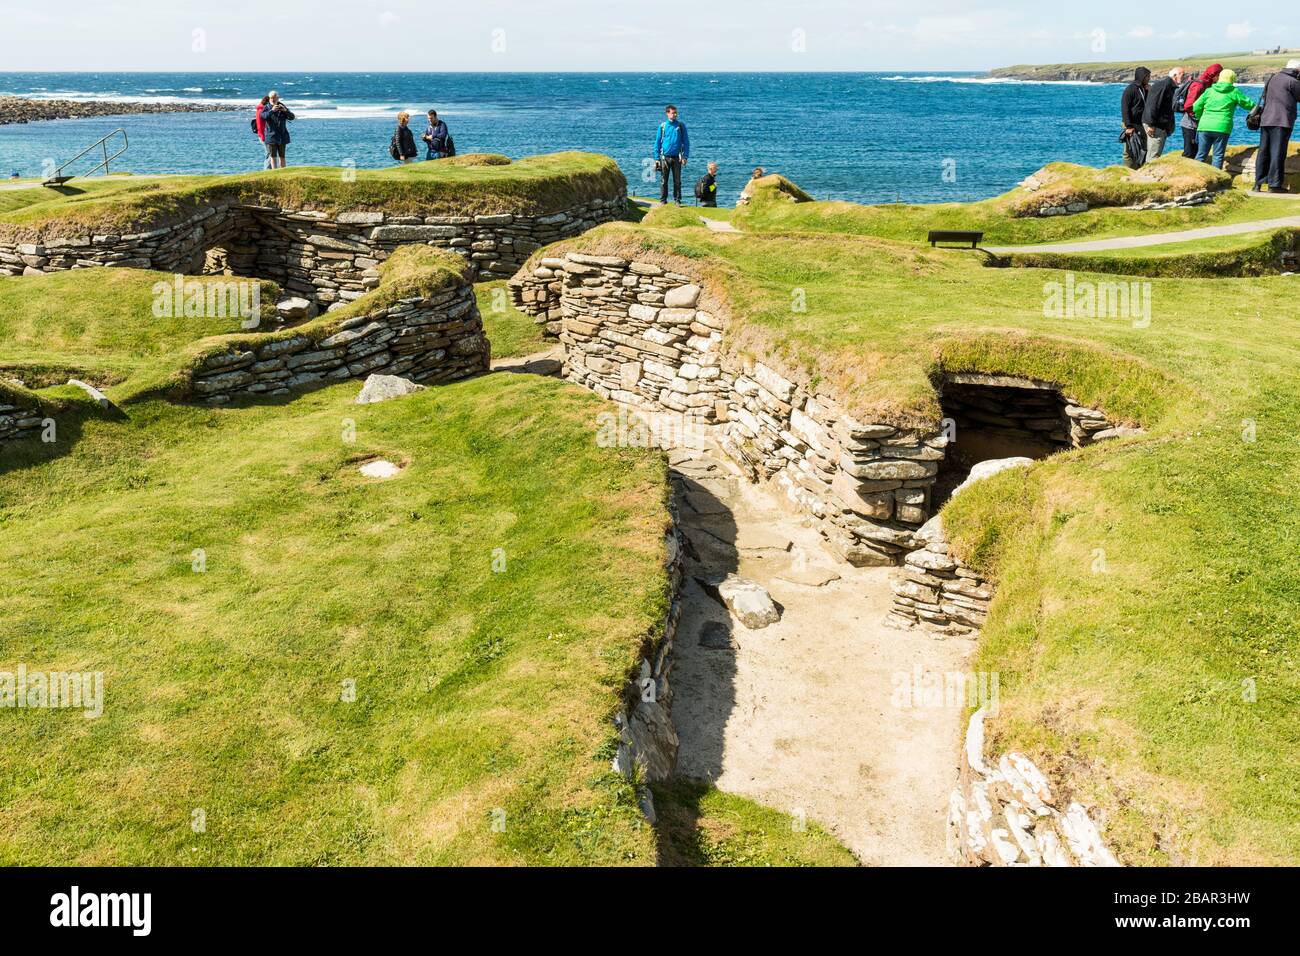 Skara Brae is a Neolithic settlement on the Bay of Skaill, Orkney, Scotland.  It was occupied between 3180 BC and 2500 BC. Stock Photo